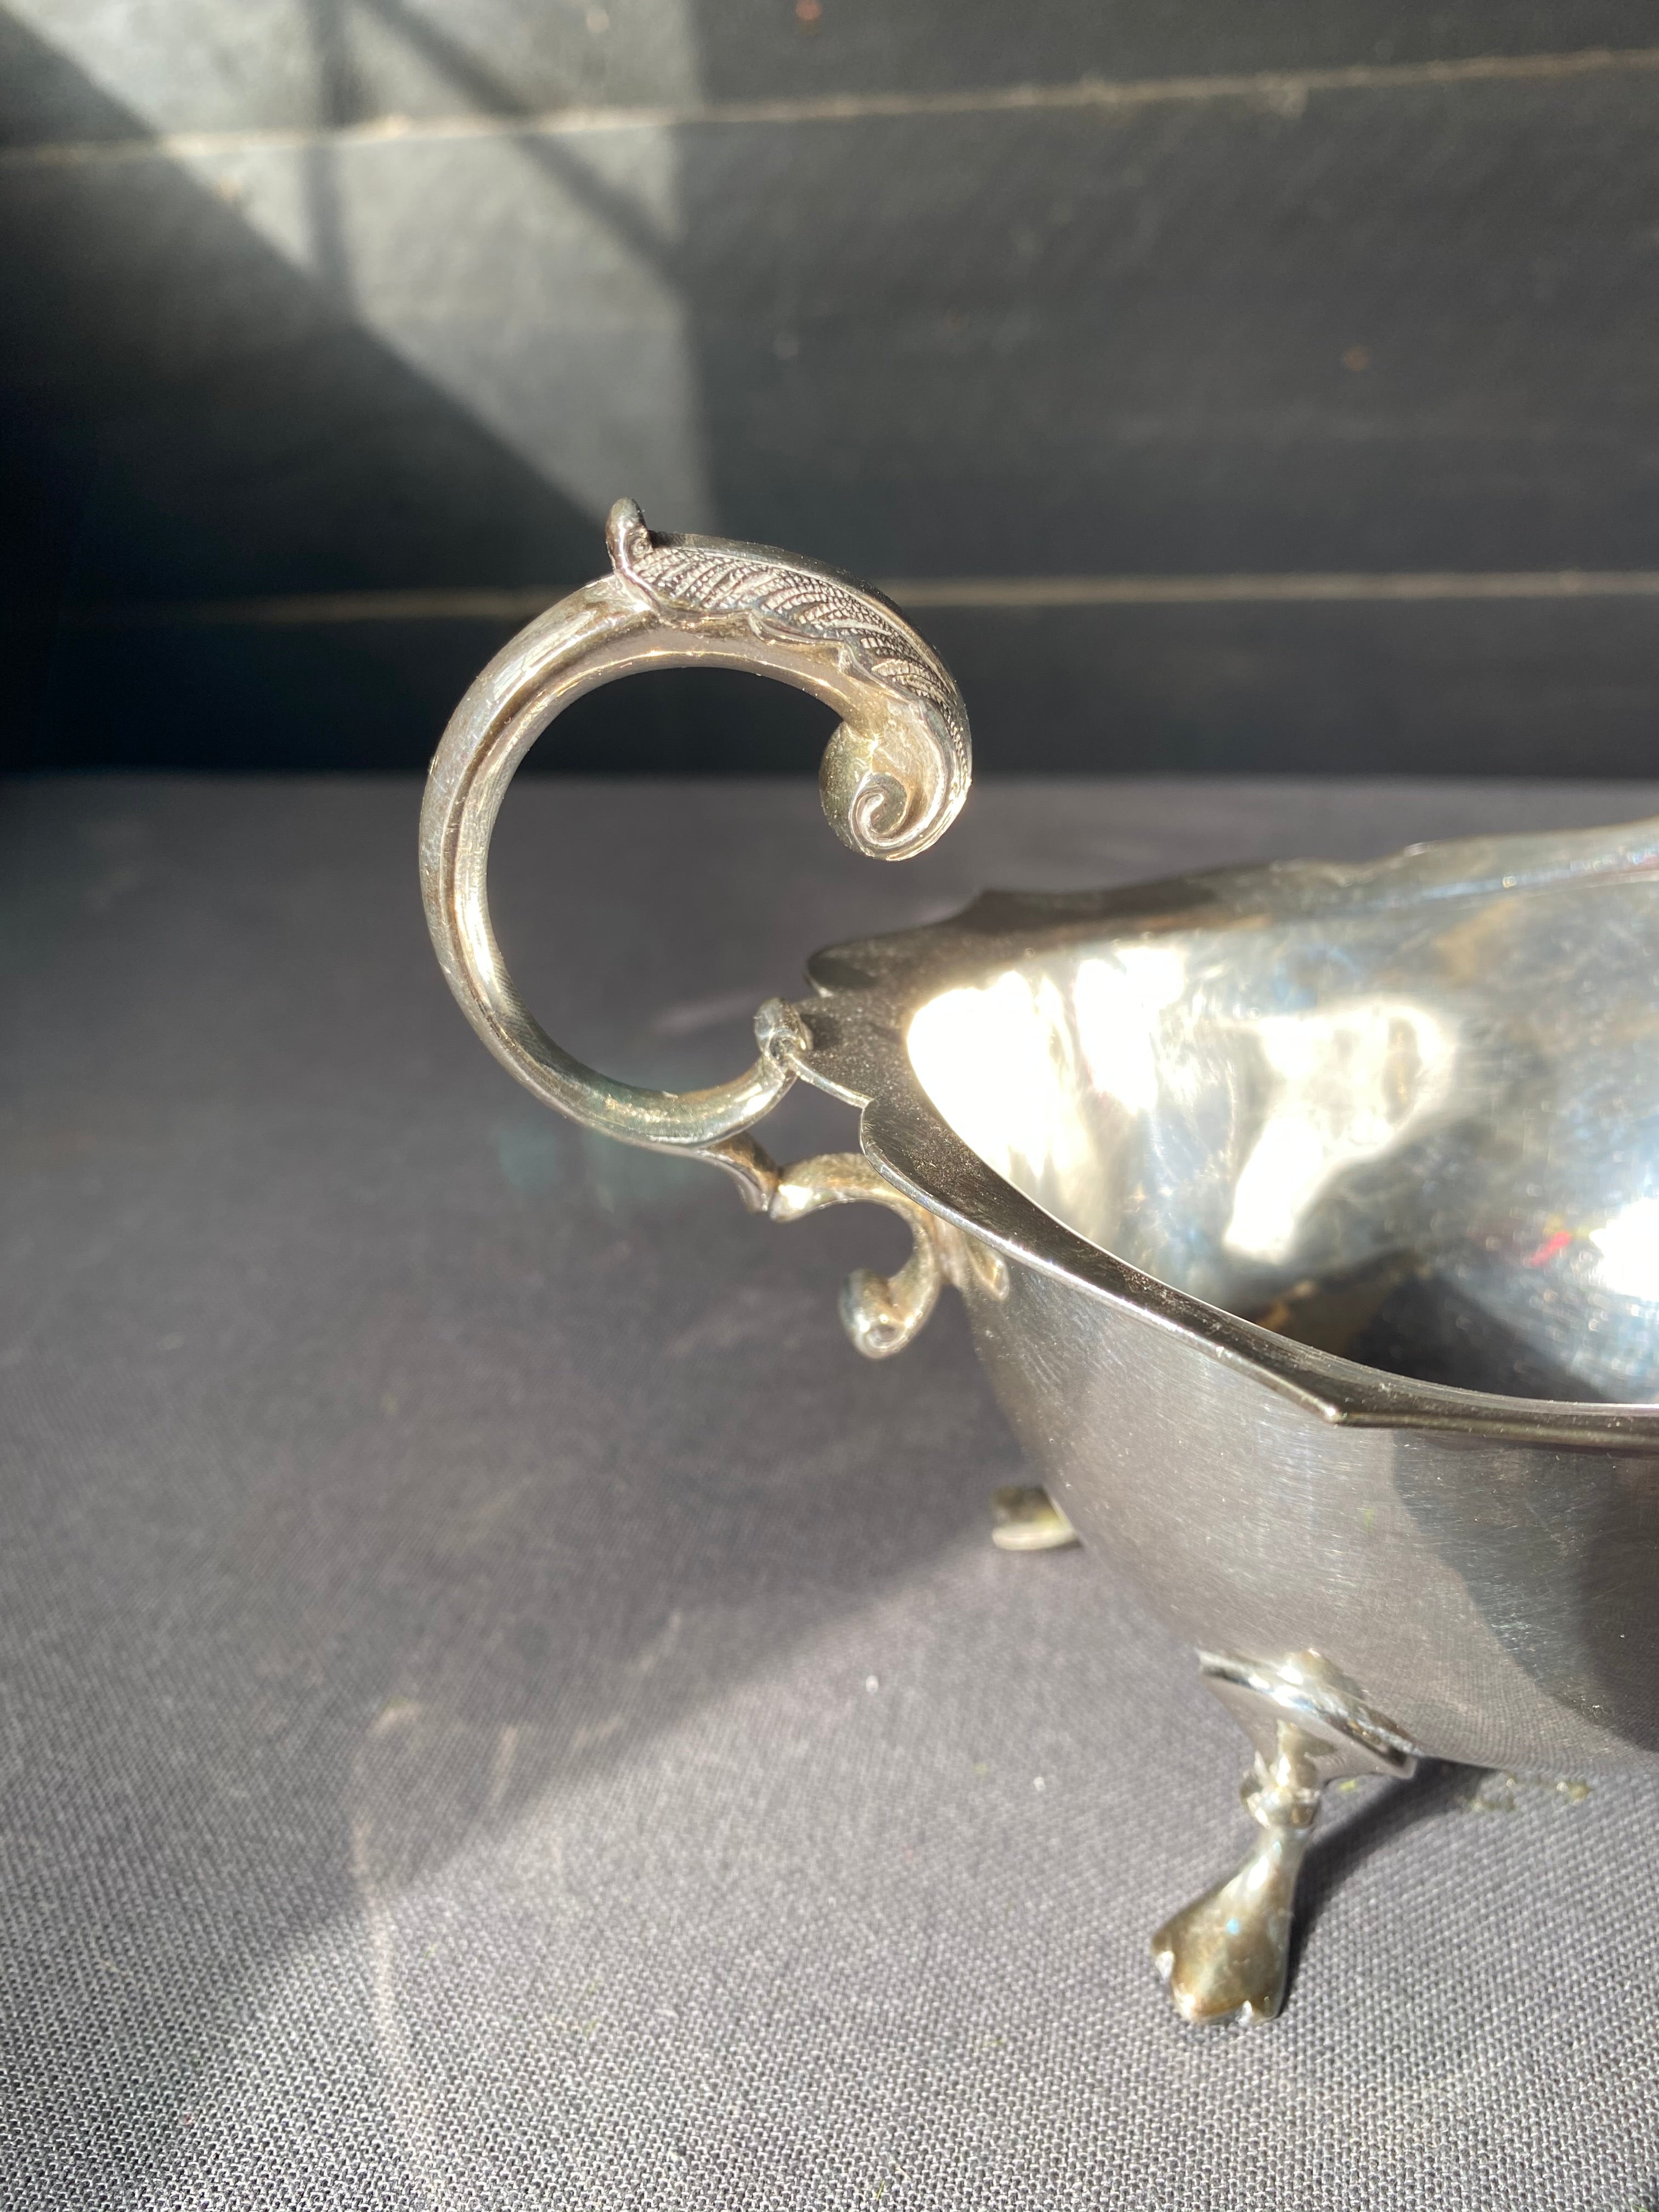 Mappin & Webb Silver Sauceboat with Feet